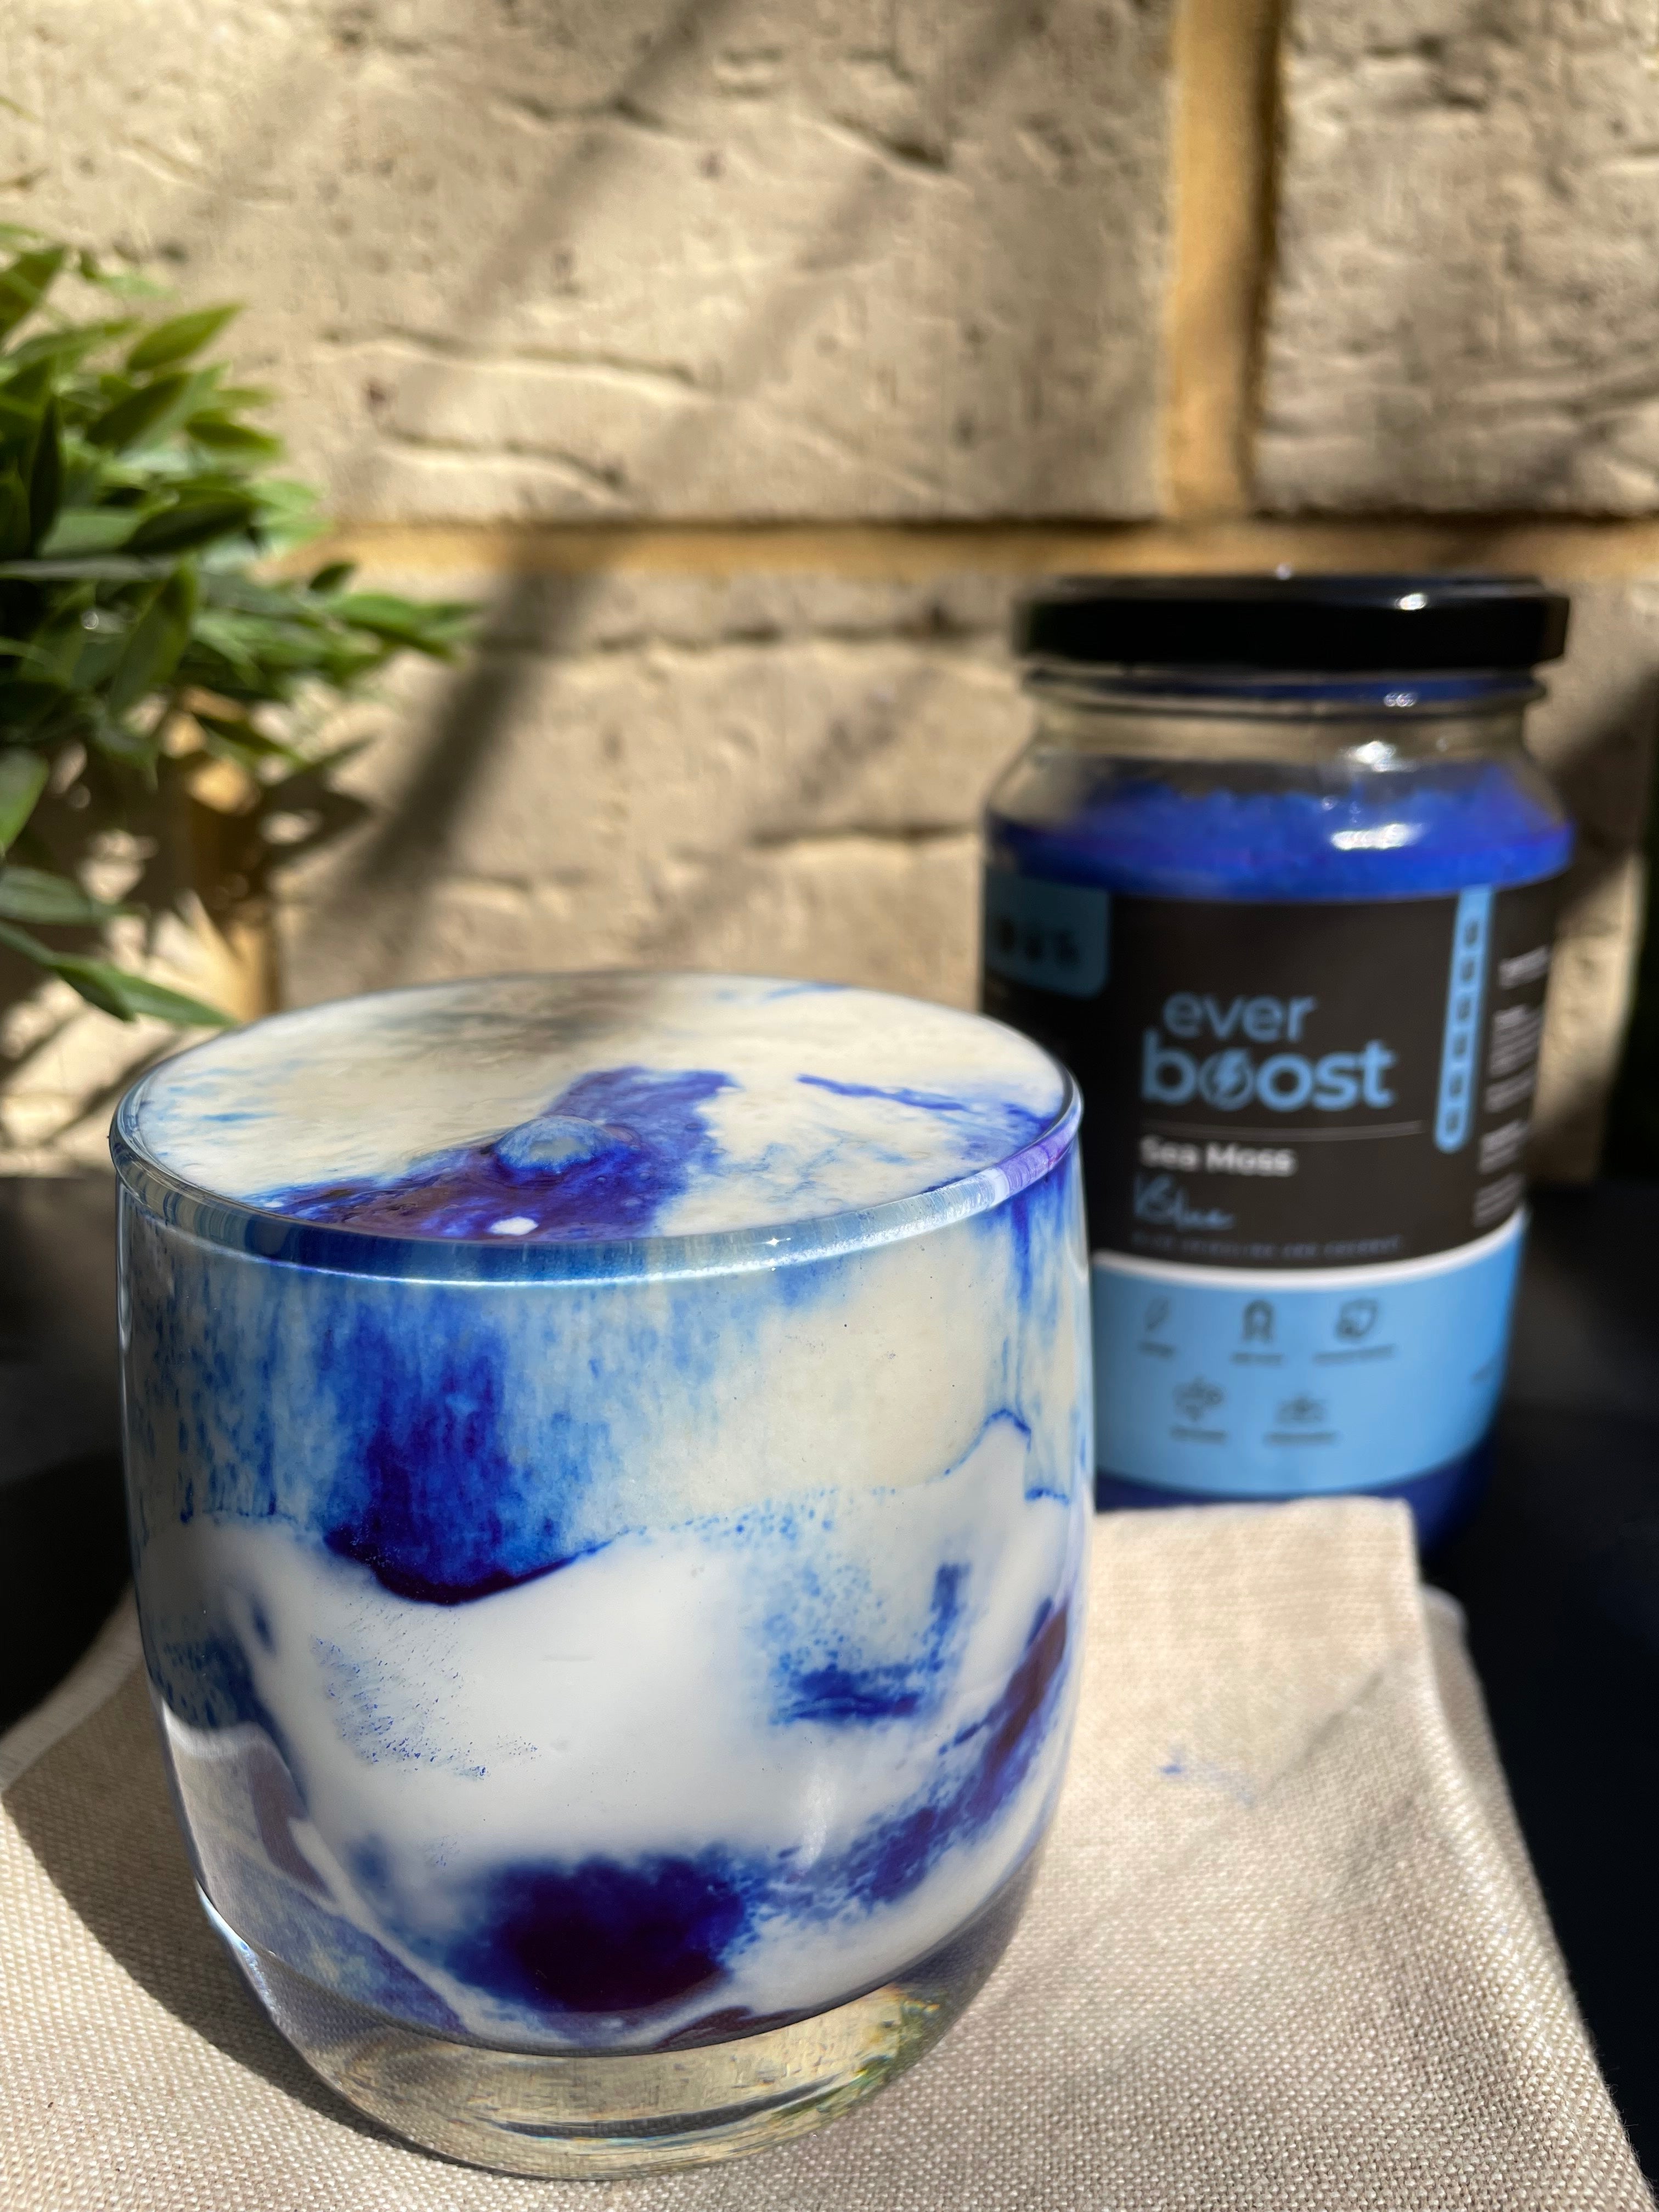 Blue Bomb Smoothie with Everboost Sea Moss Gel